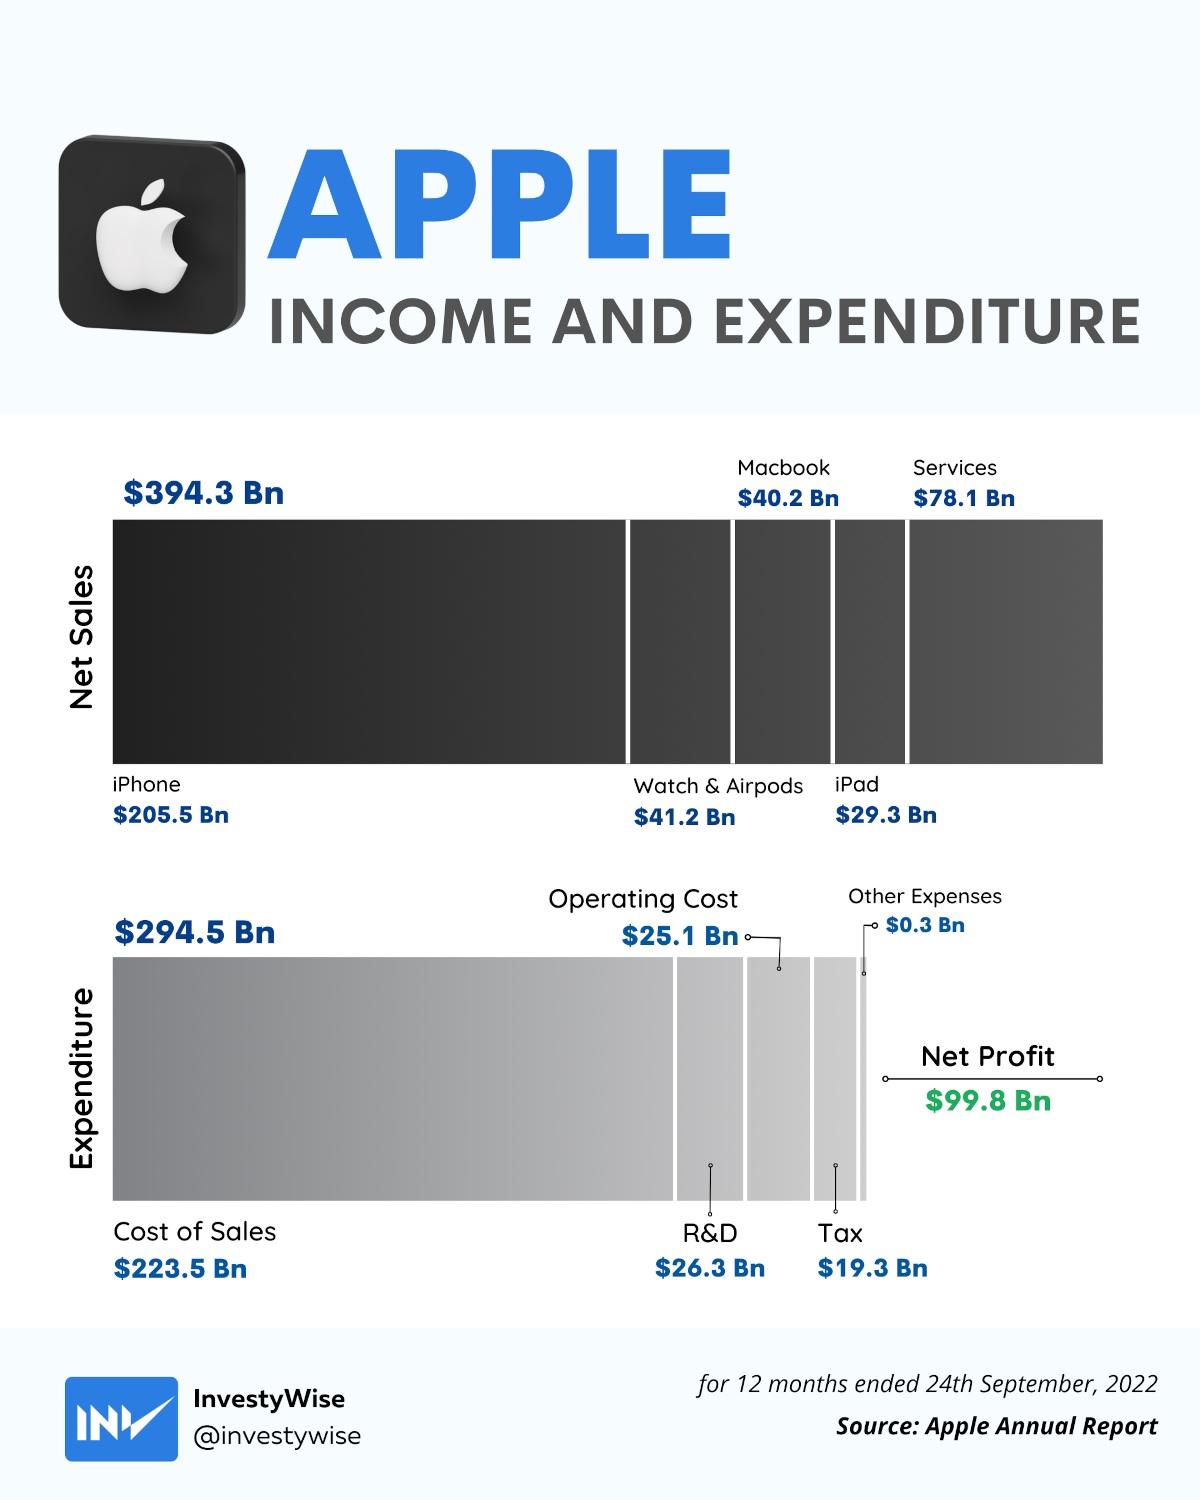 Apple Income and Expenditure 2022.jpg